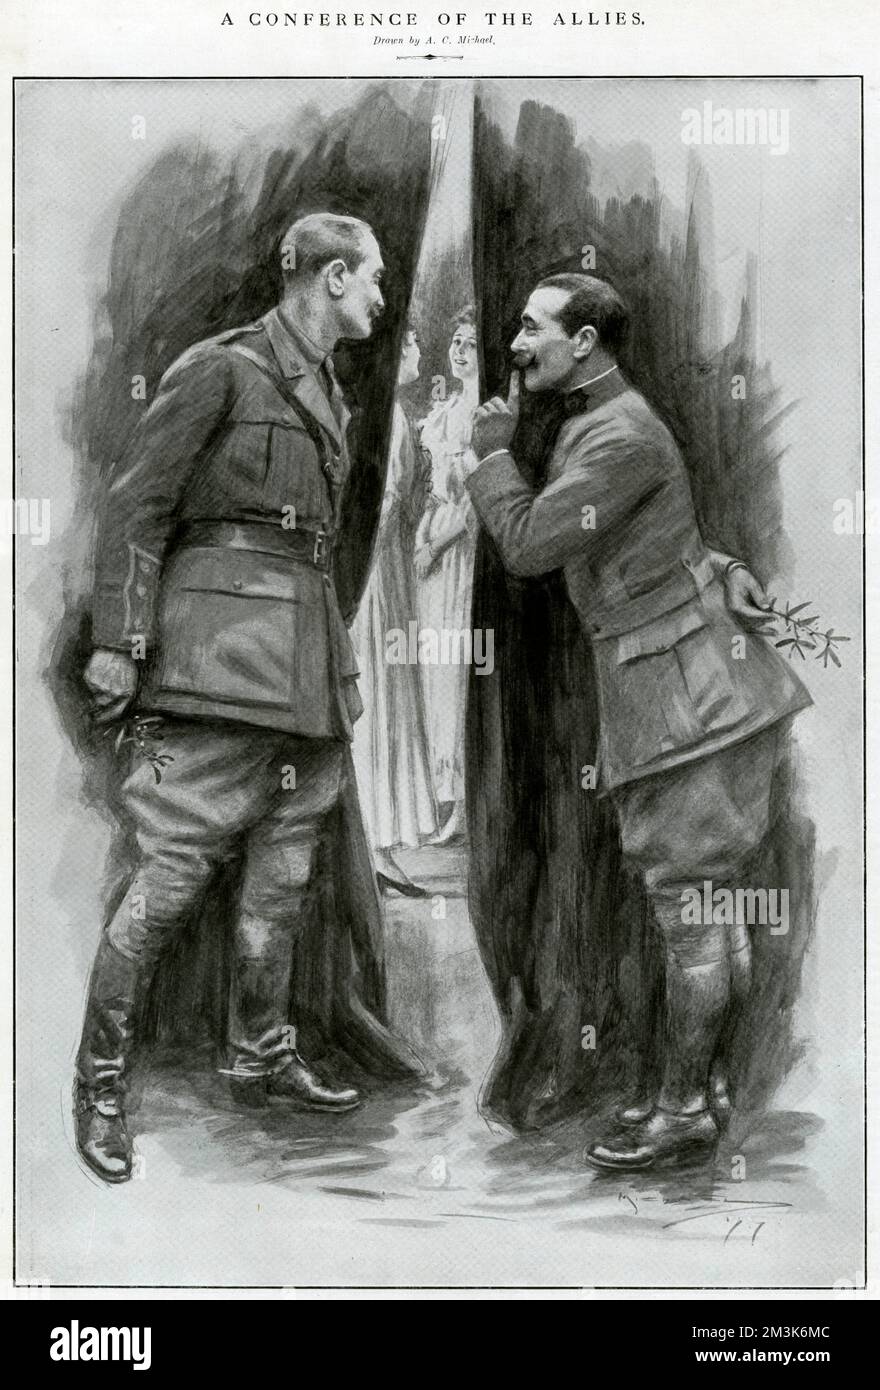 British officers, presumably home on leave for Christmas, standing behind a curtain with sprigs of mistletoe behind their backs.  They are discussing how best to romantically intercept two pretty girls in the room beyond.  From Holly Leaves, the Christmas number of The Illustrated Sporting &amp; Dramatic News.     Date: 1917 Stock Photo